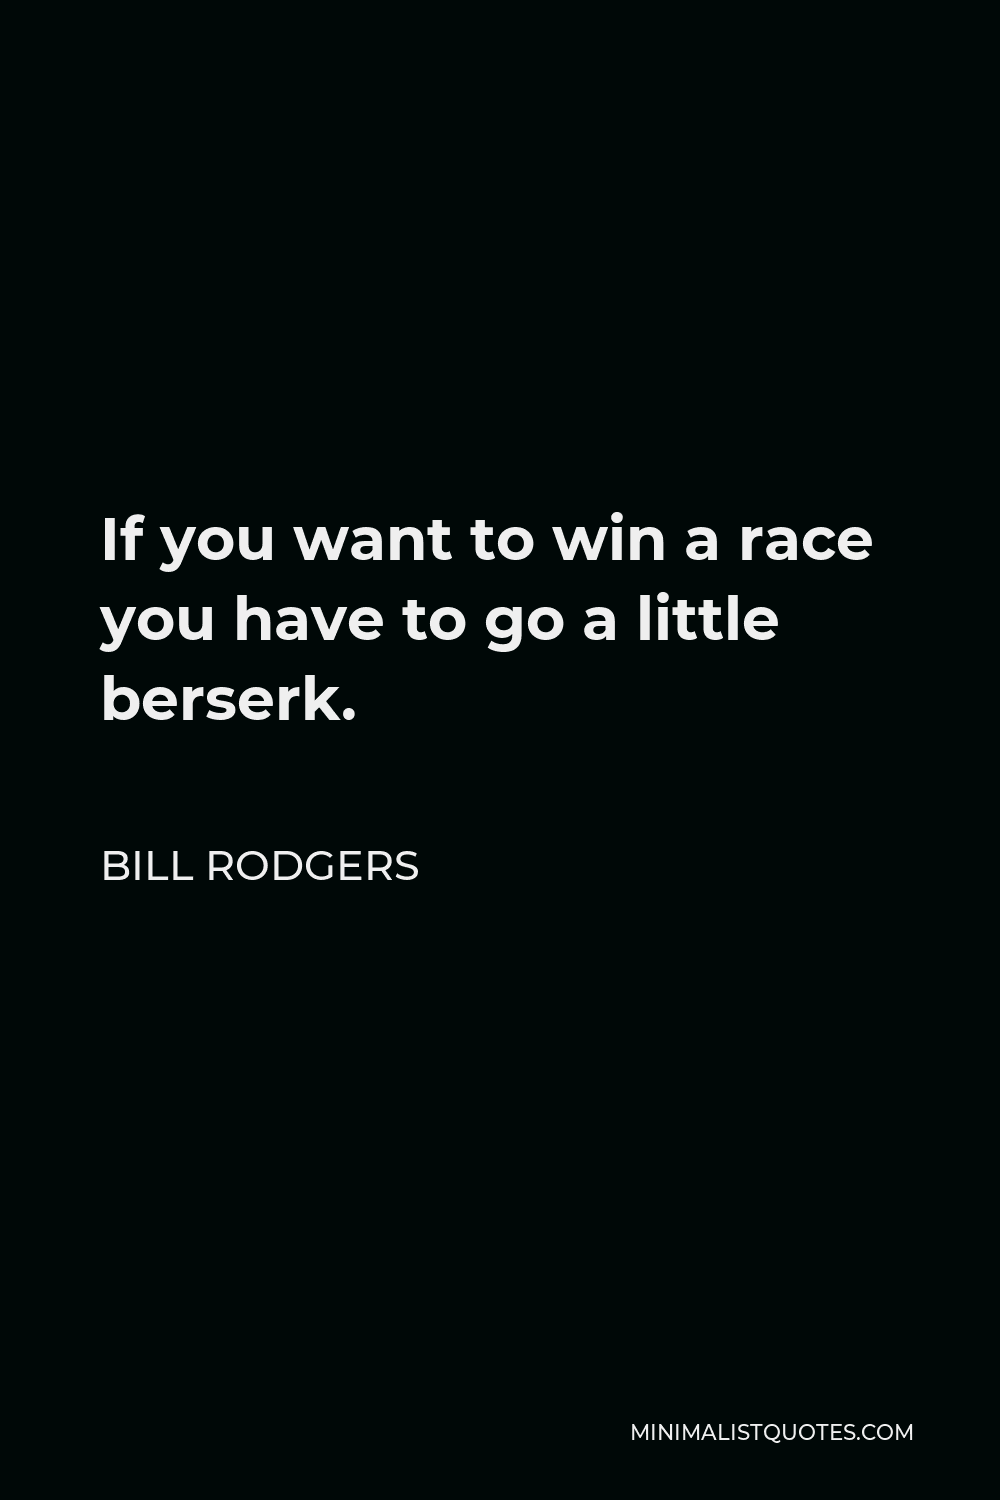 Bill Rodgers Quote - If you want to win a race you have to go a little berserk.